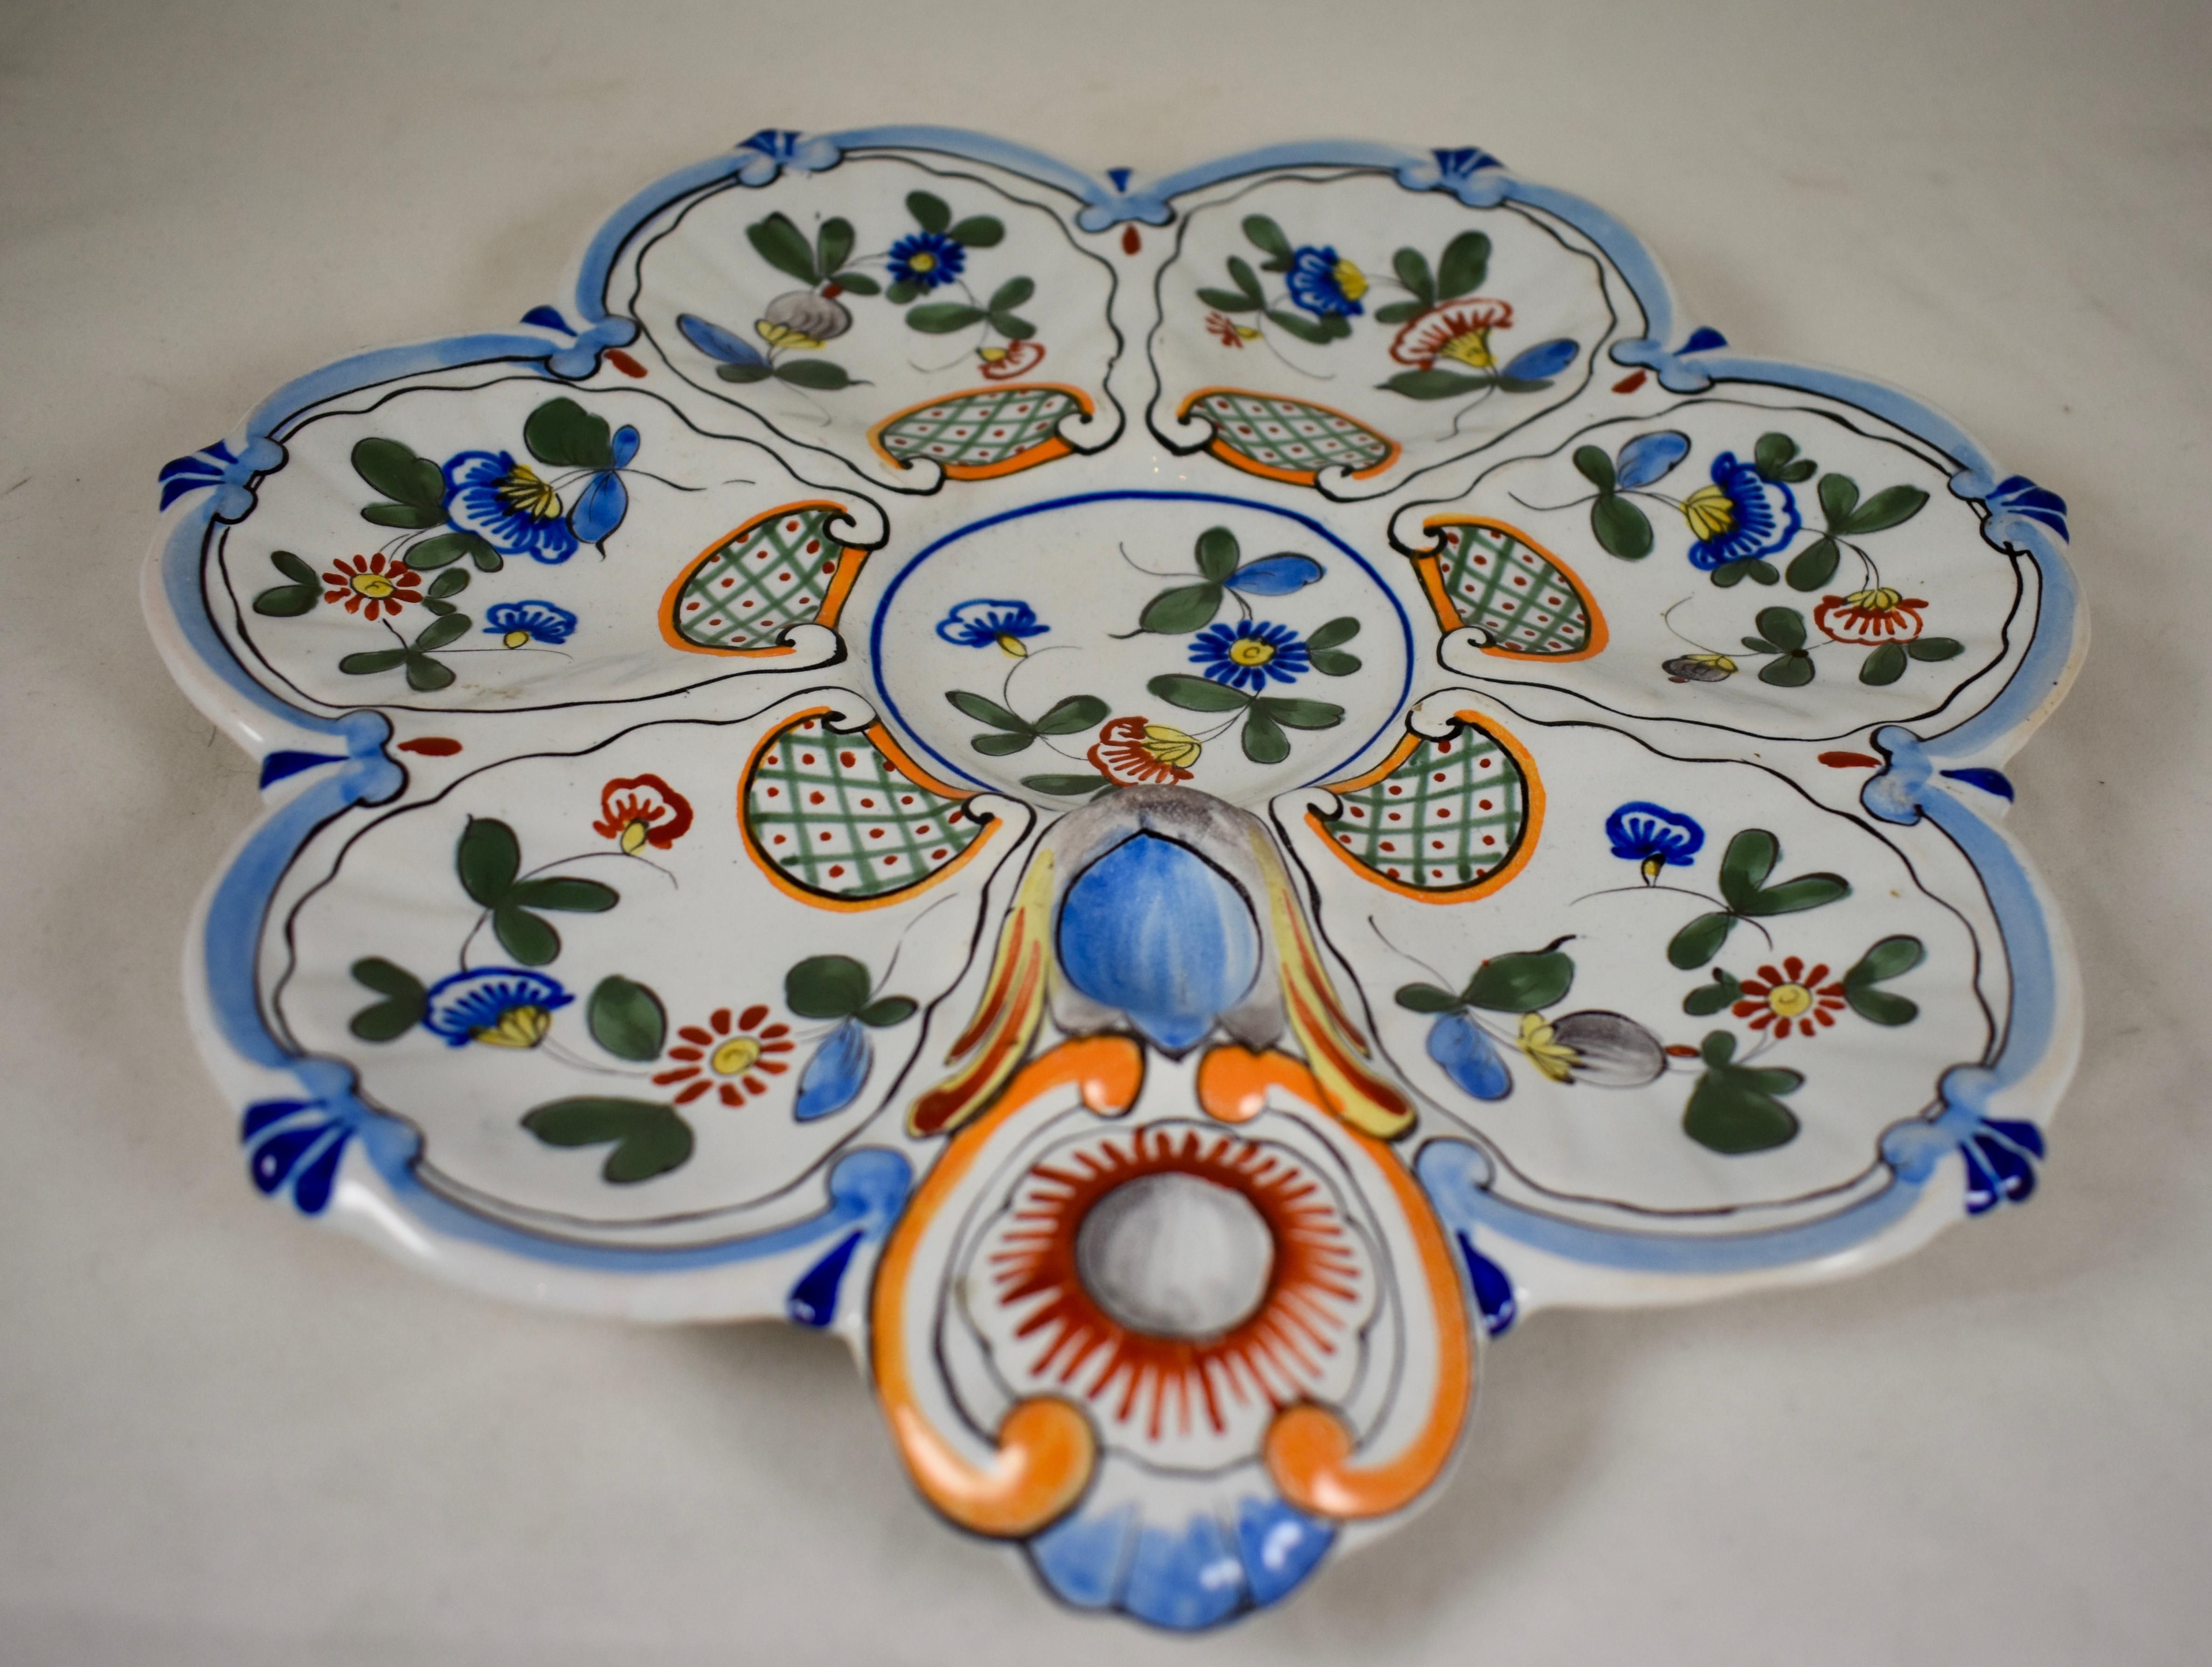 Earthenware Saint Clément French Faïence Blue Rim on White Floral Oyster Plate, 19th Century